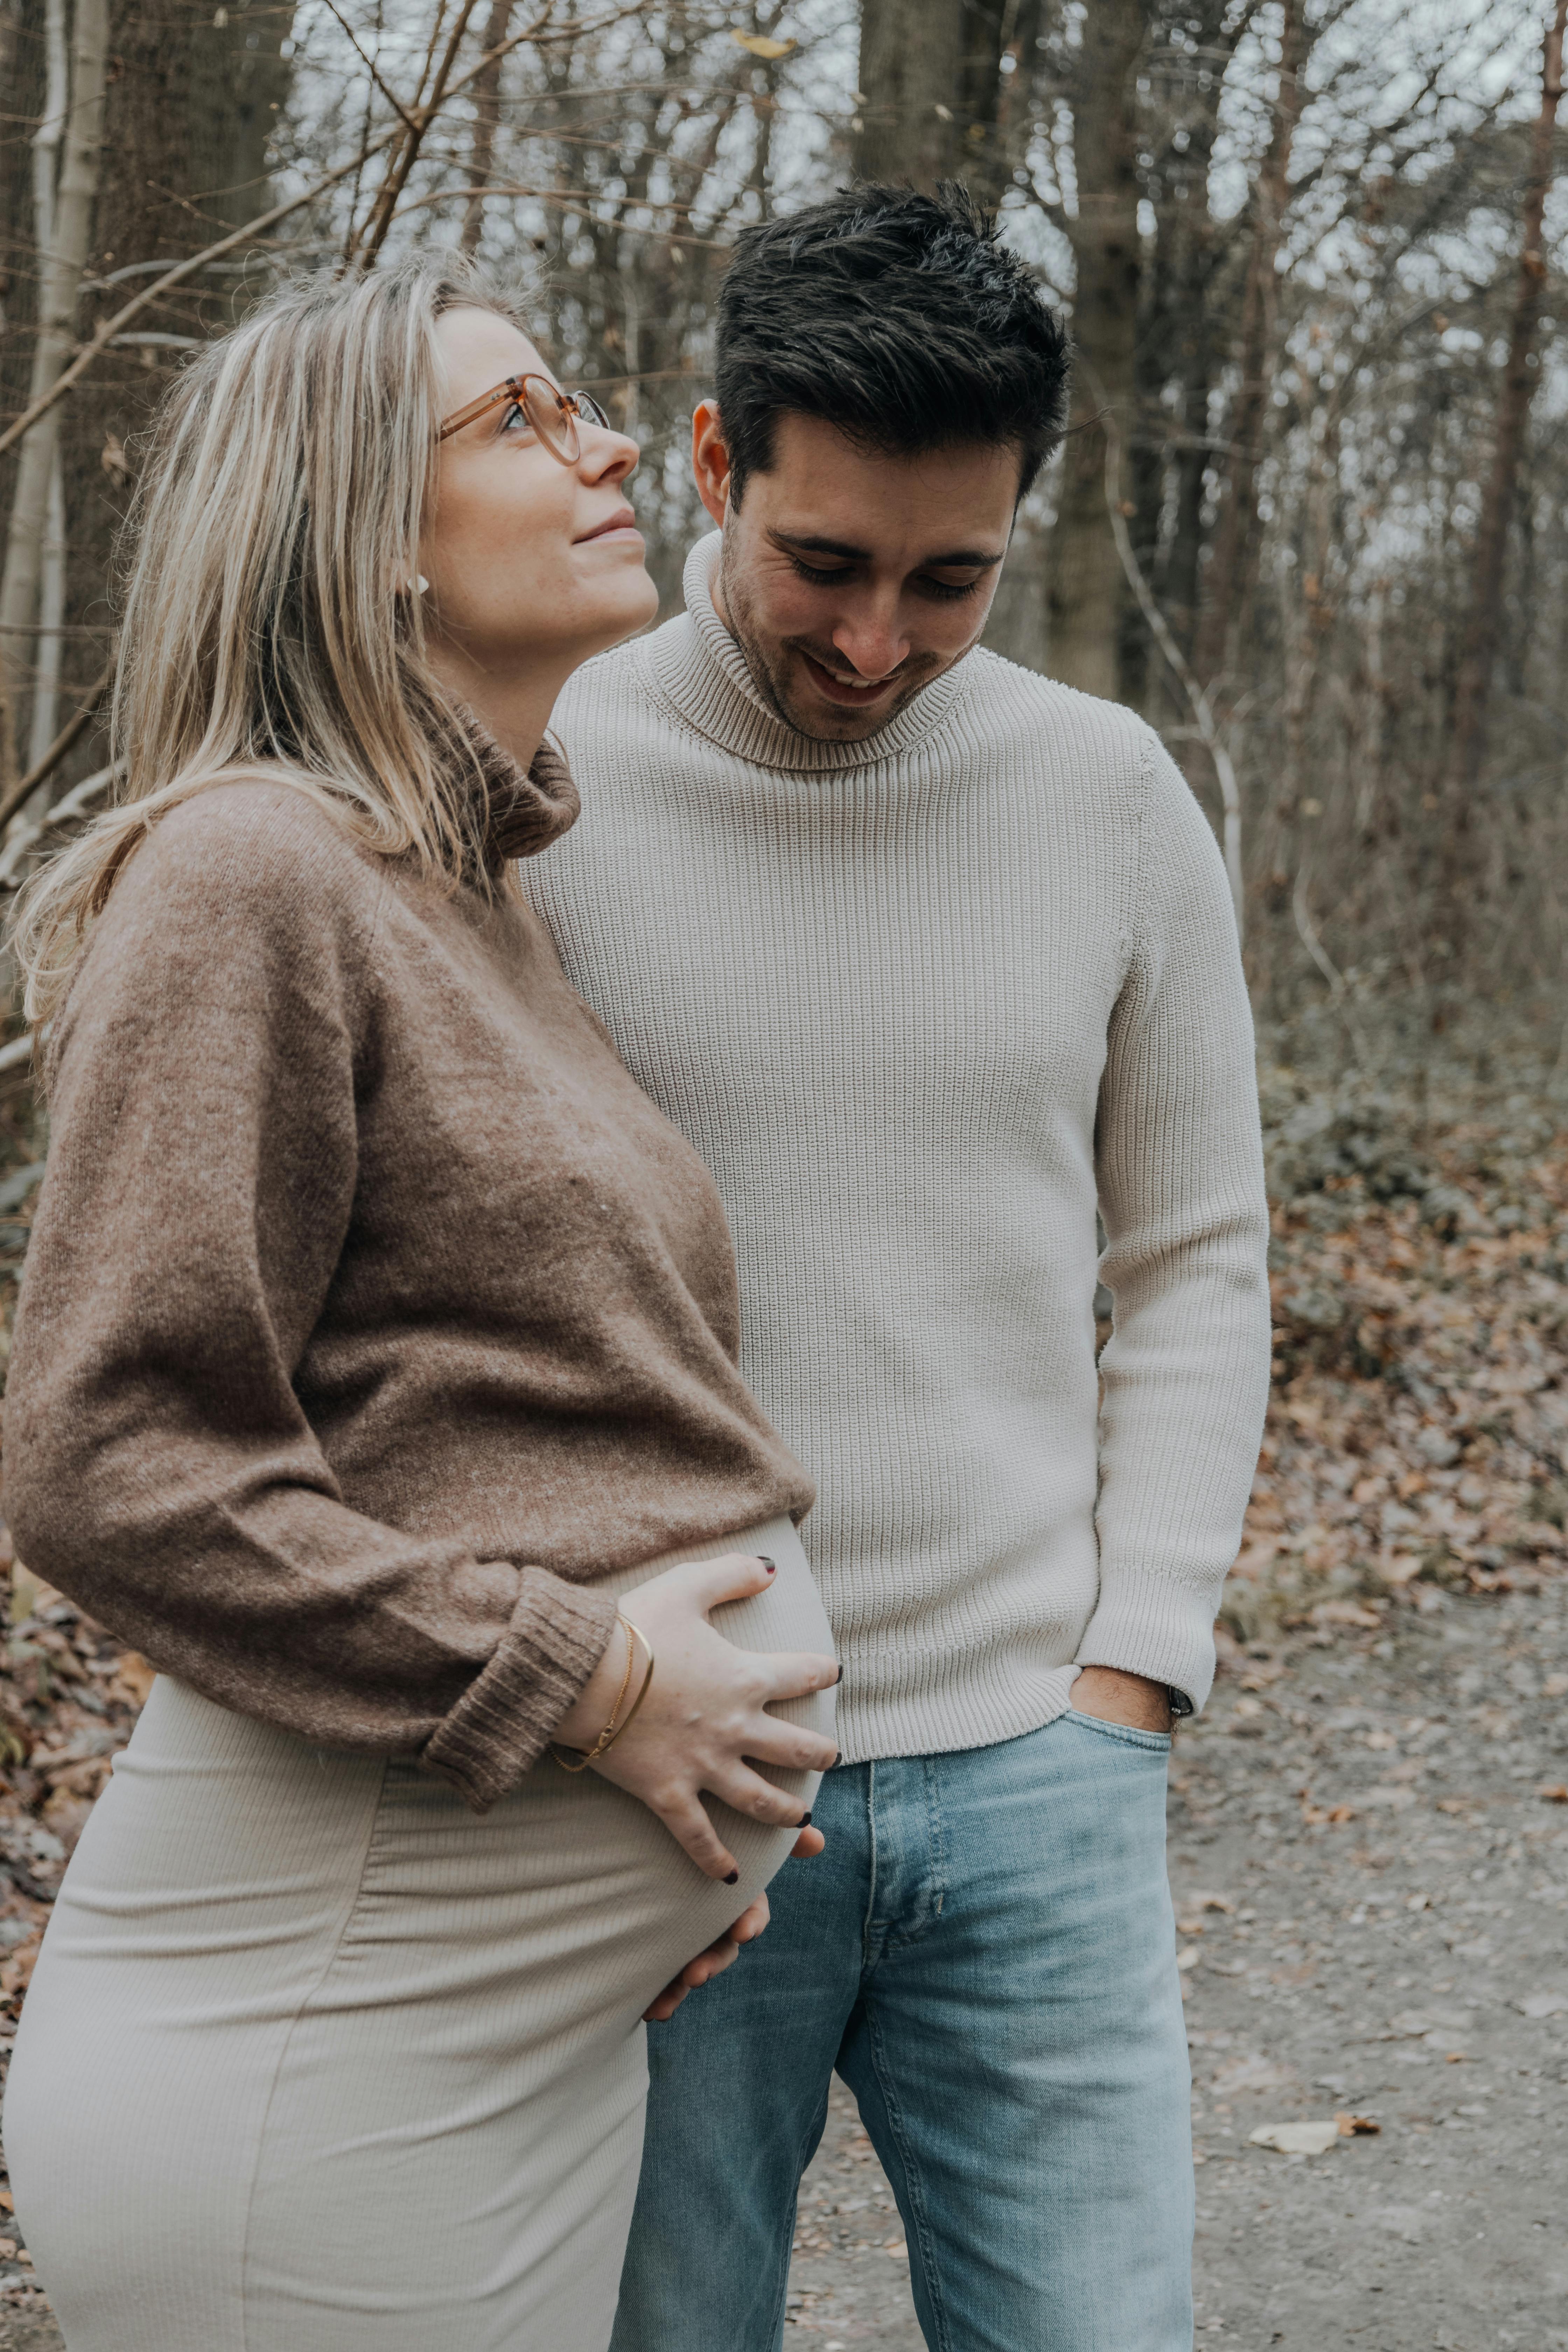 A pregnant woman cradling her baby bump while the man looks on | Source: Pexels